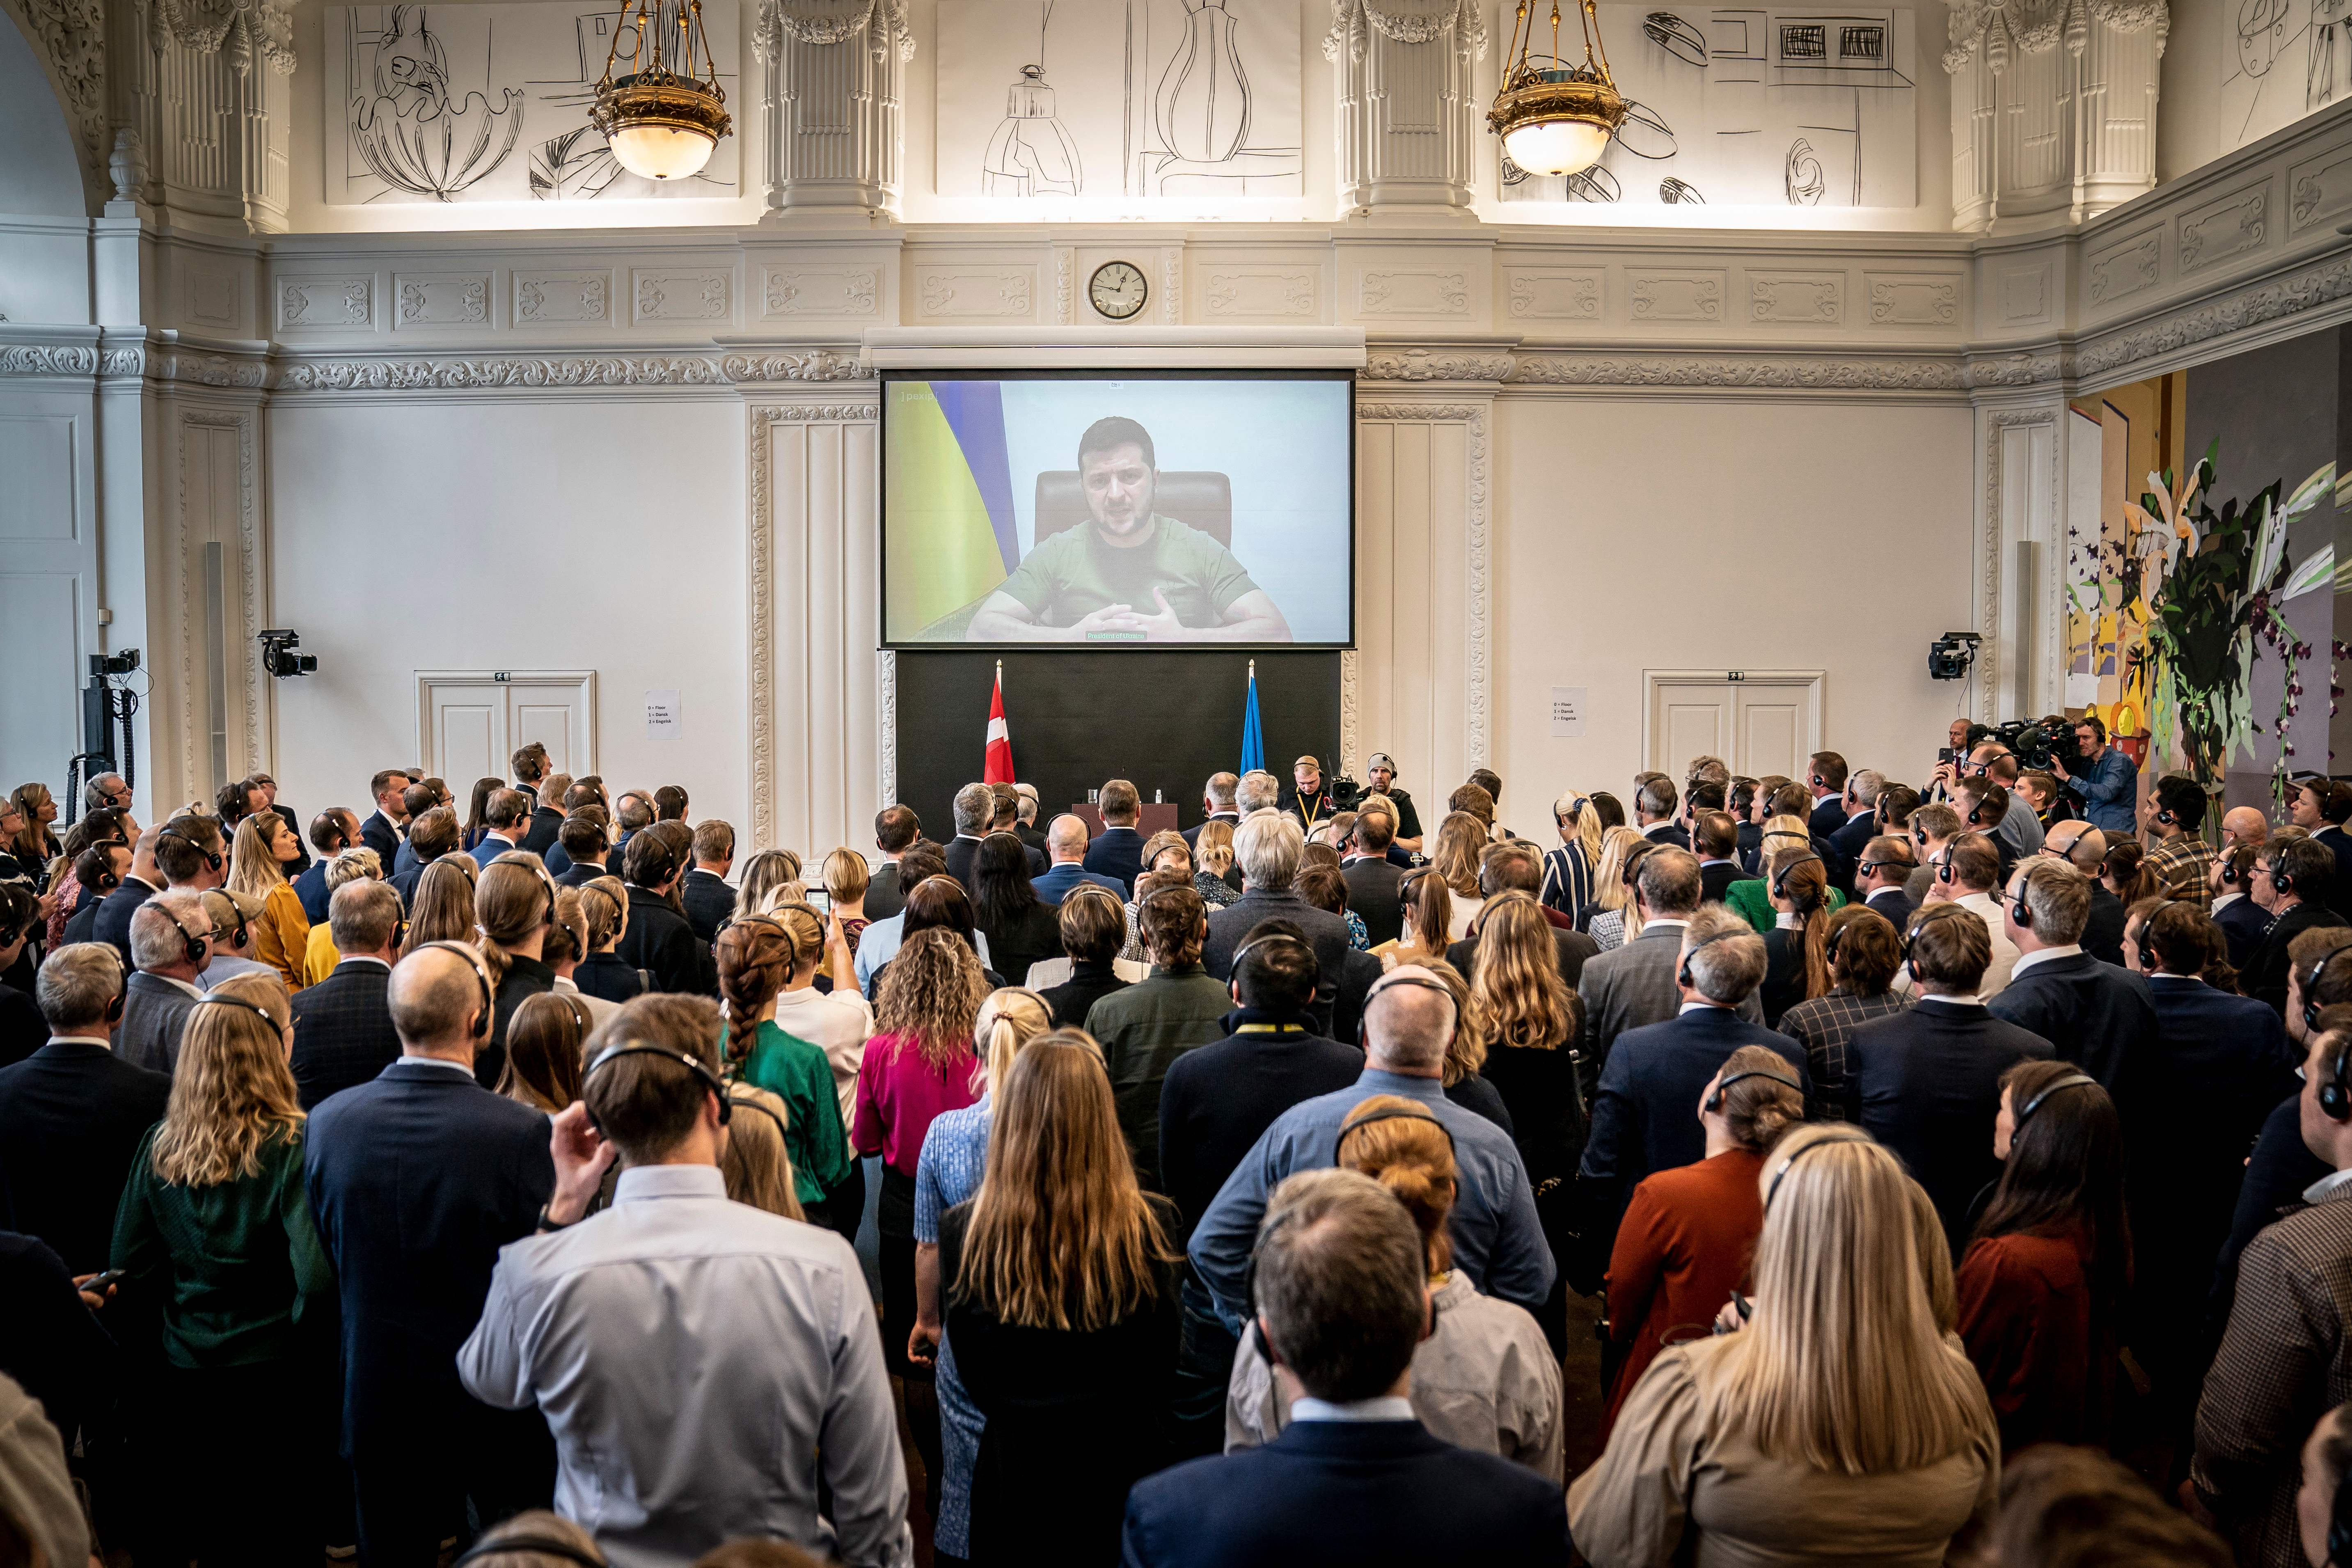 Ukrainian President Volodymyr Zelensky is seen on a screen as he speaks in a video broadcast to members of the Danish Parliament at Christiansborg Castle in Copenhagen on March 29.